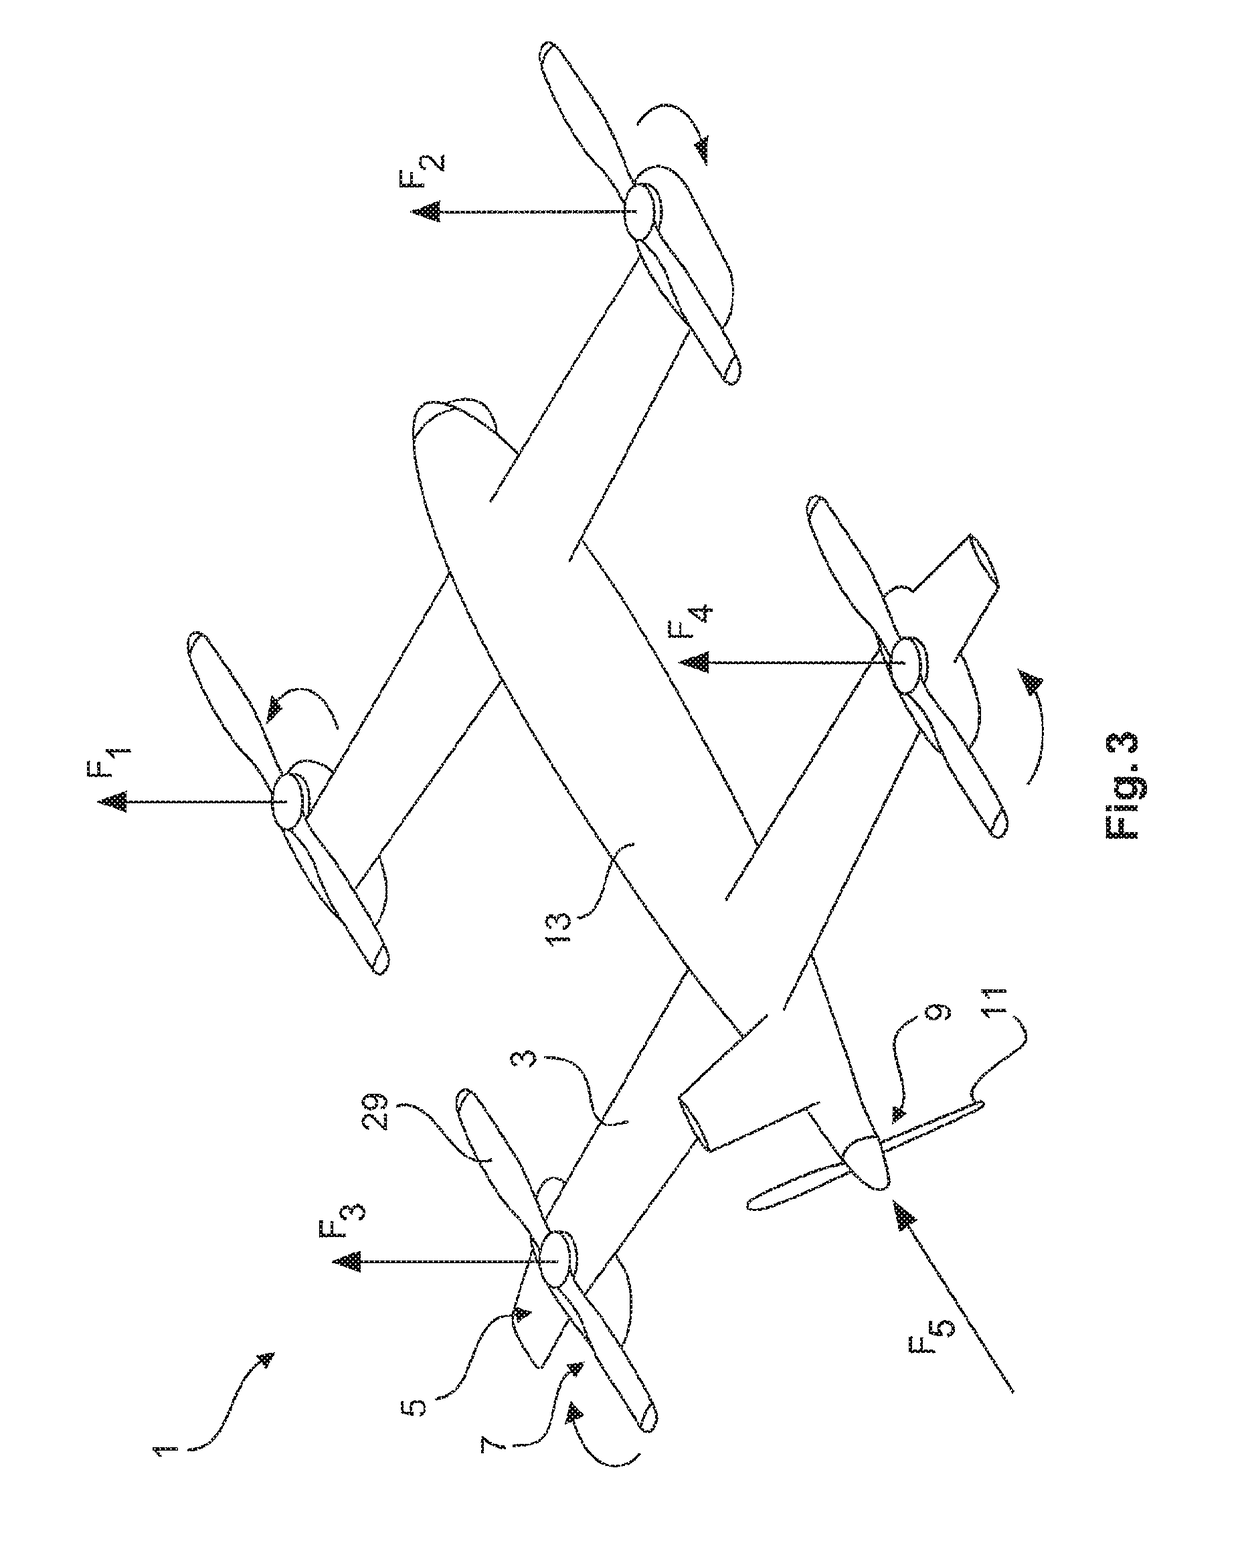 Aircraft capable of vertical take-off